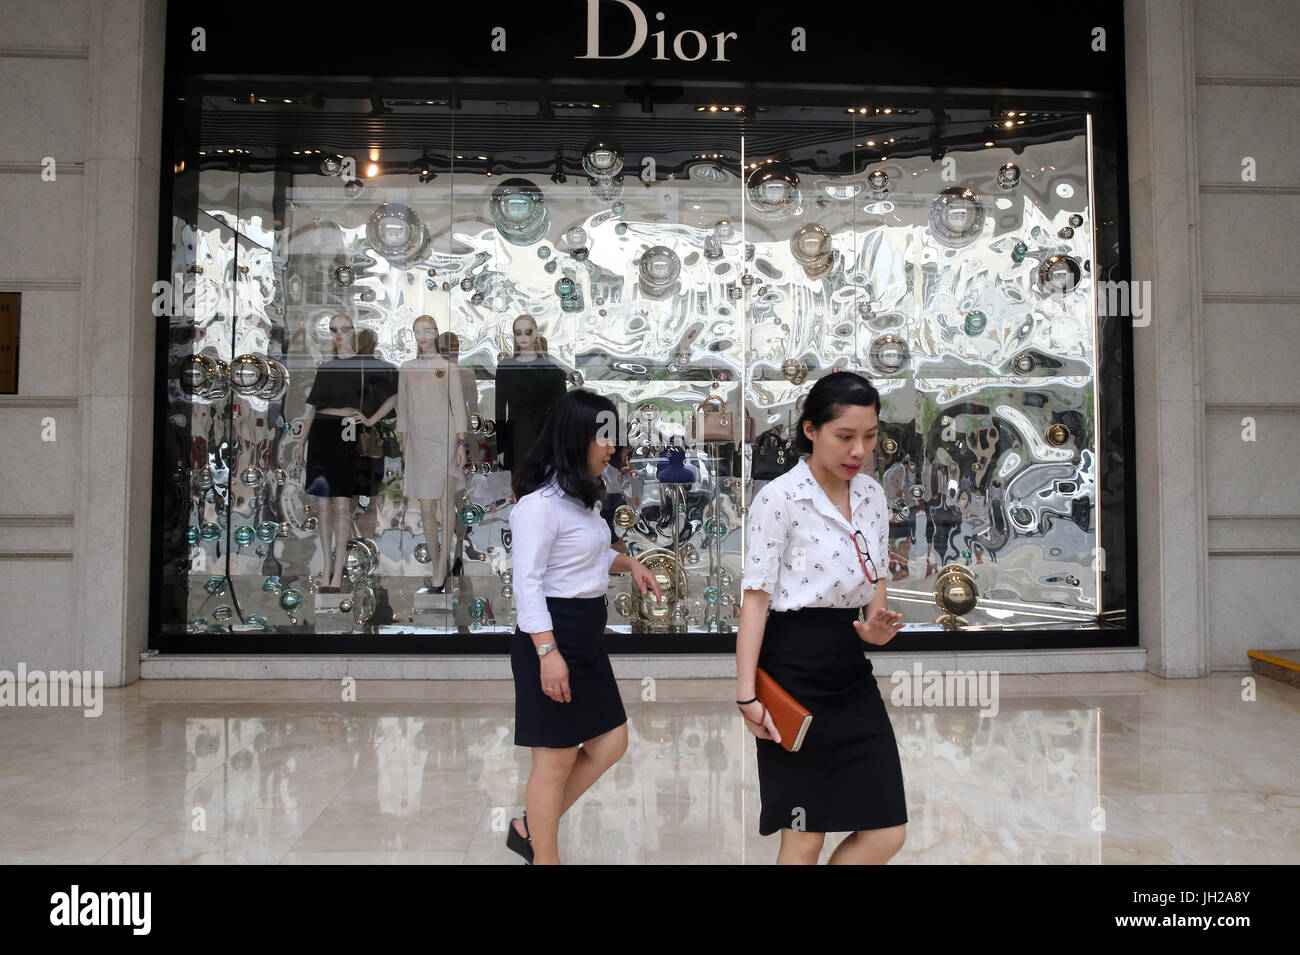 Ho Chi Minh ville. District 1. Shopping Mall. Christain Dior. Le Vietnam. Banque D'Images